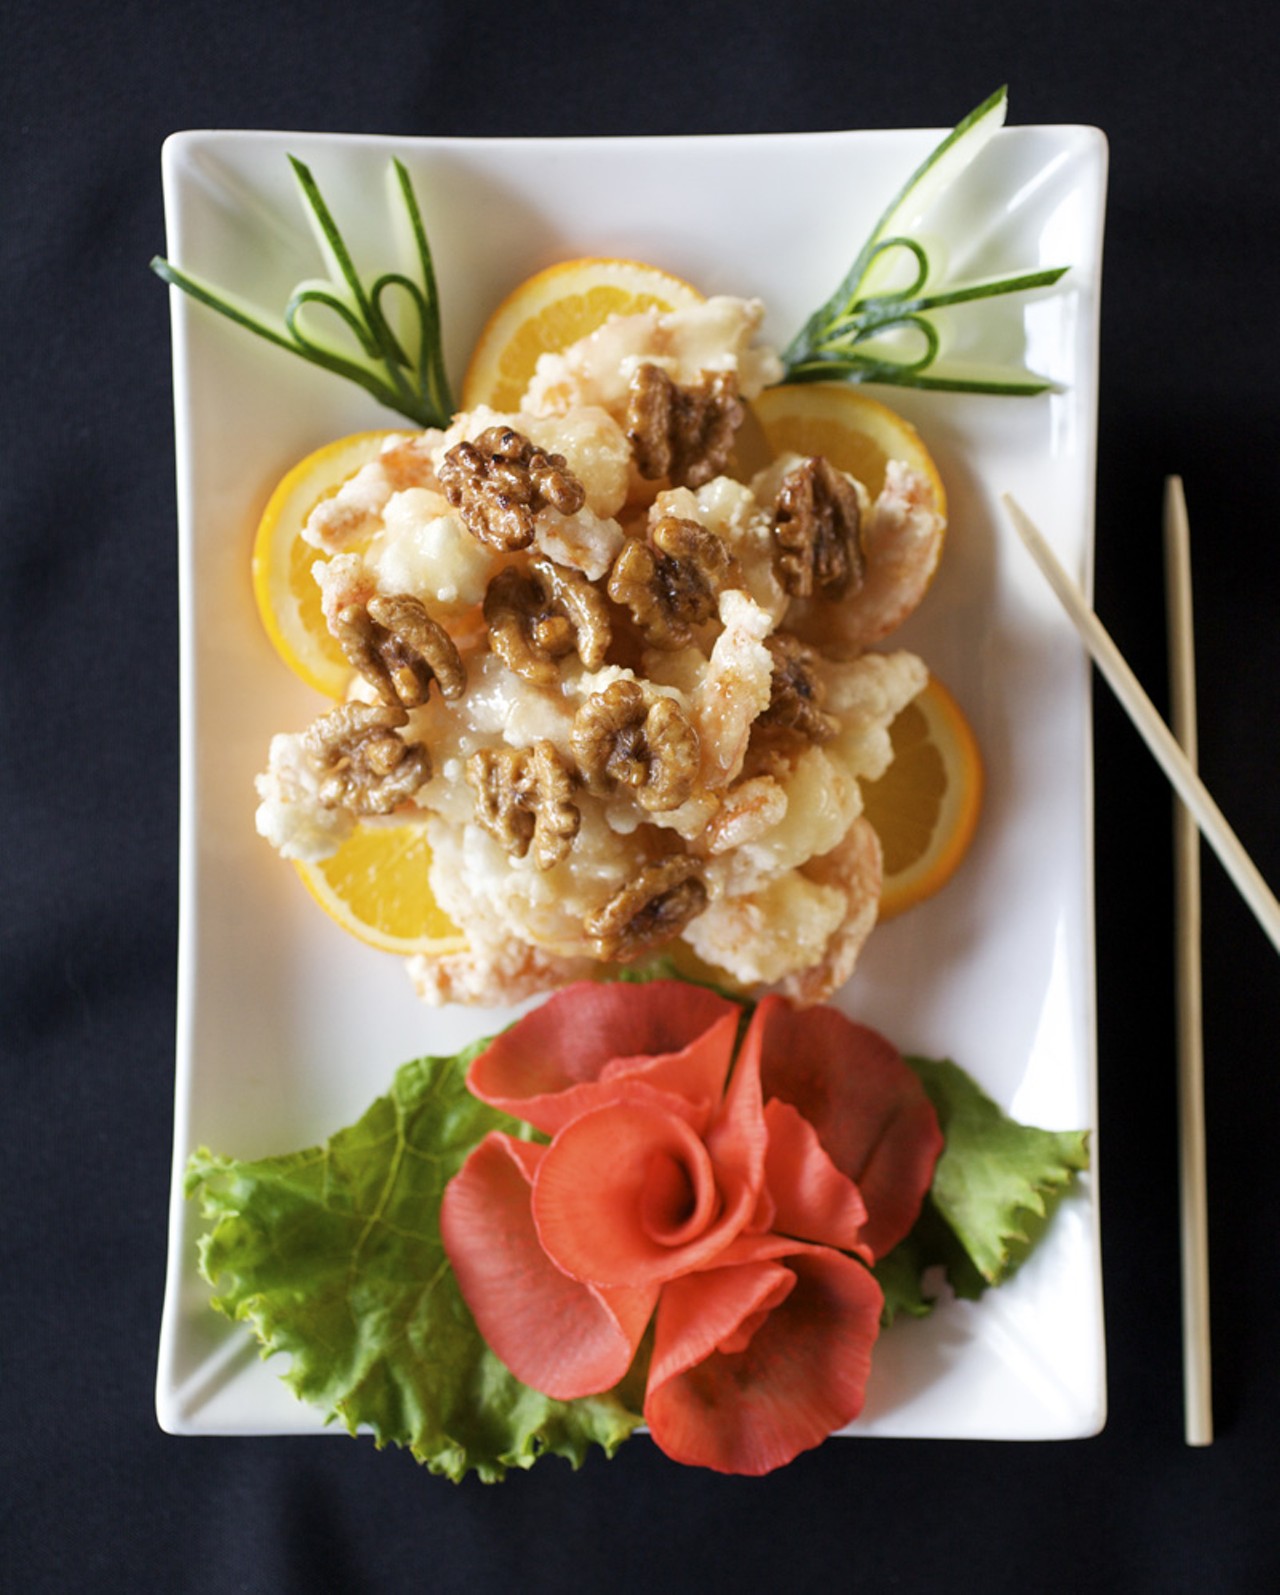 Walnut Prawn is golden crispy shrimp tossed with a sweet mayo sauce and topped with walnuts.